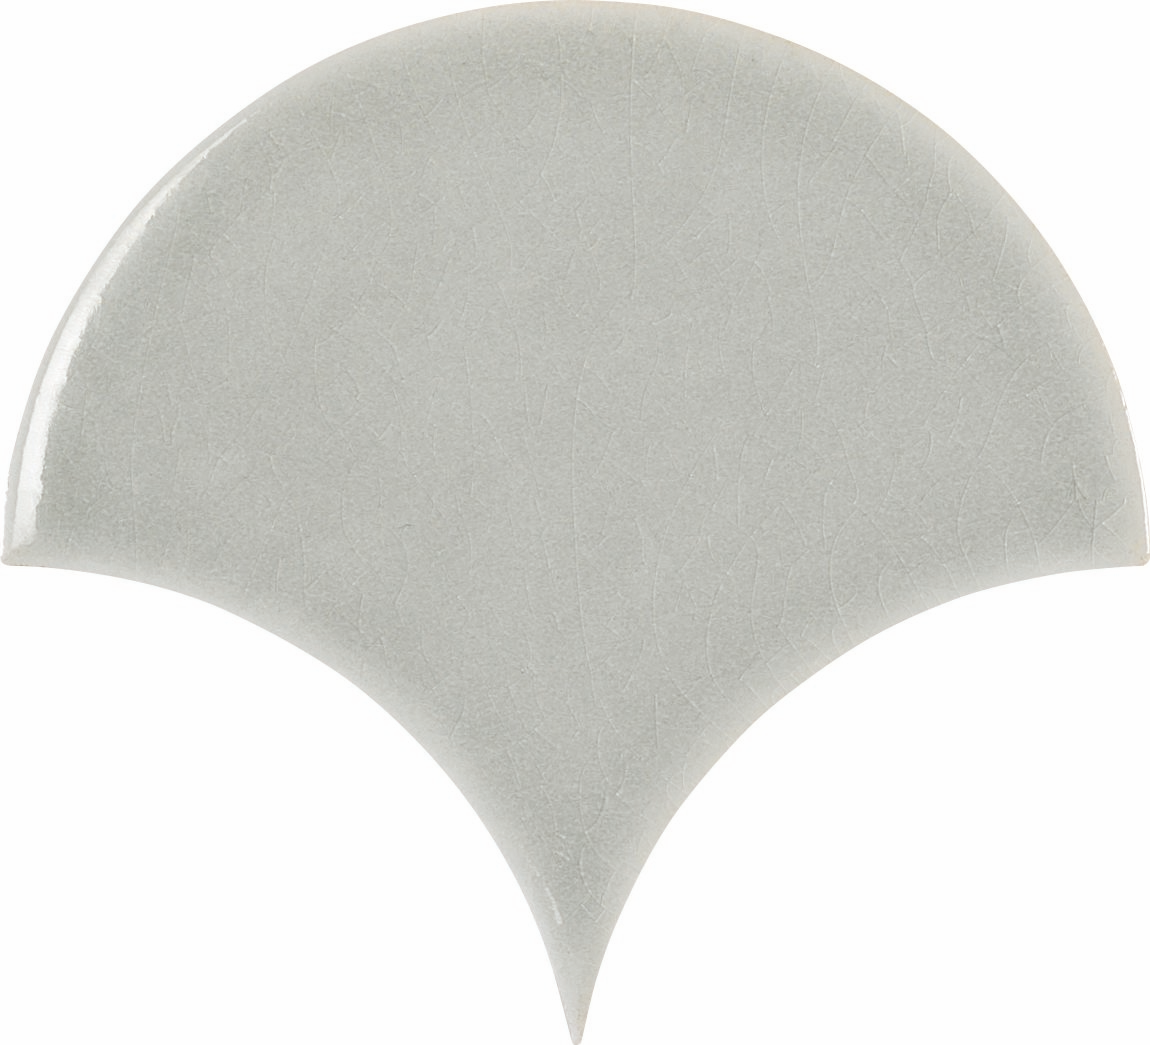 Fan 6X7 Pearl Gray Scalloped Crackled Tile - SAMPLES